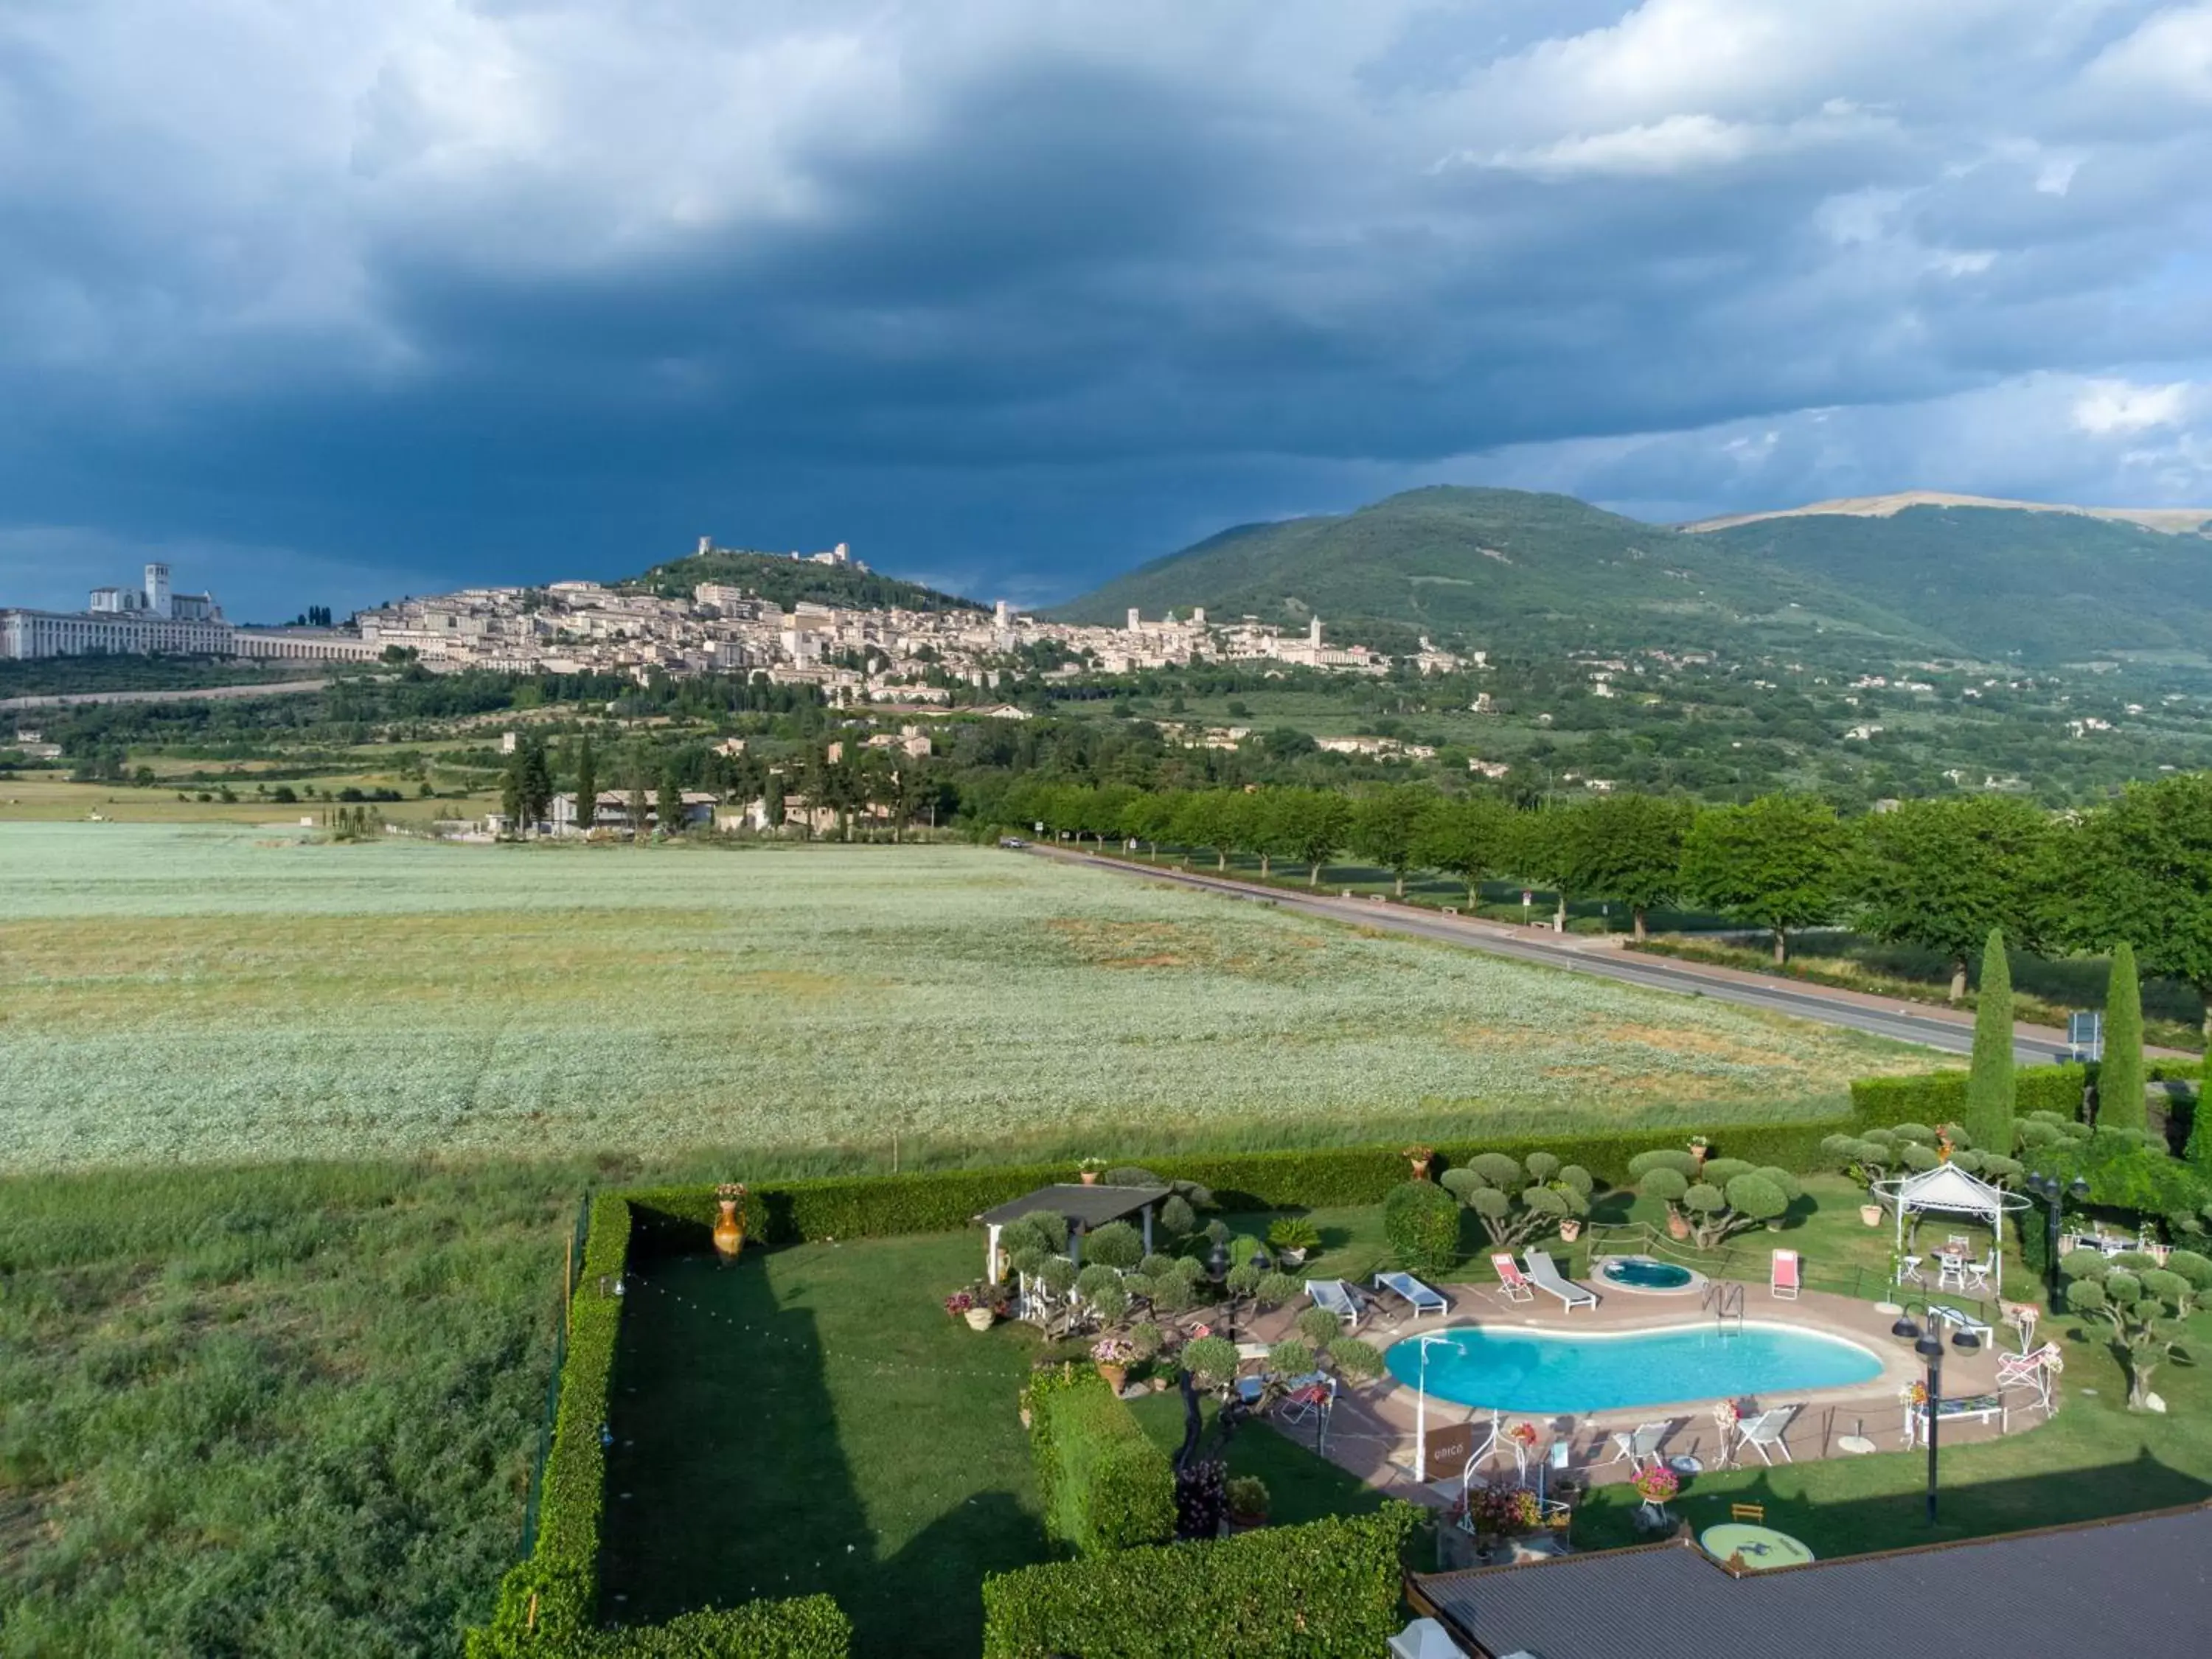 Bird's-eye View in UNICA Assisi agri-charming house